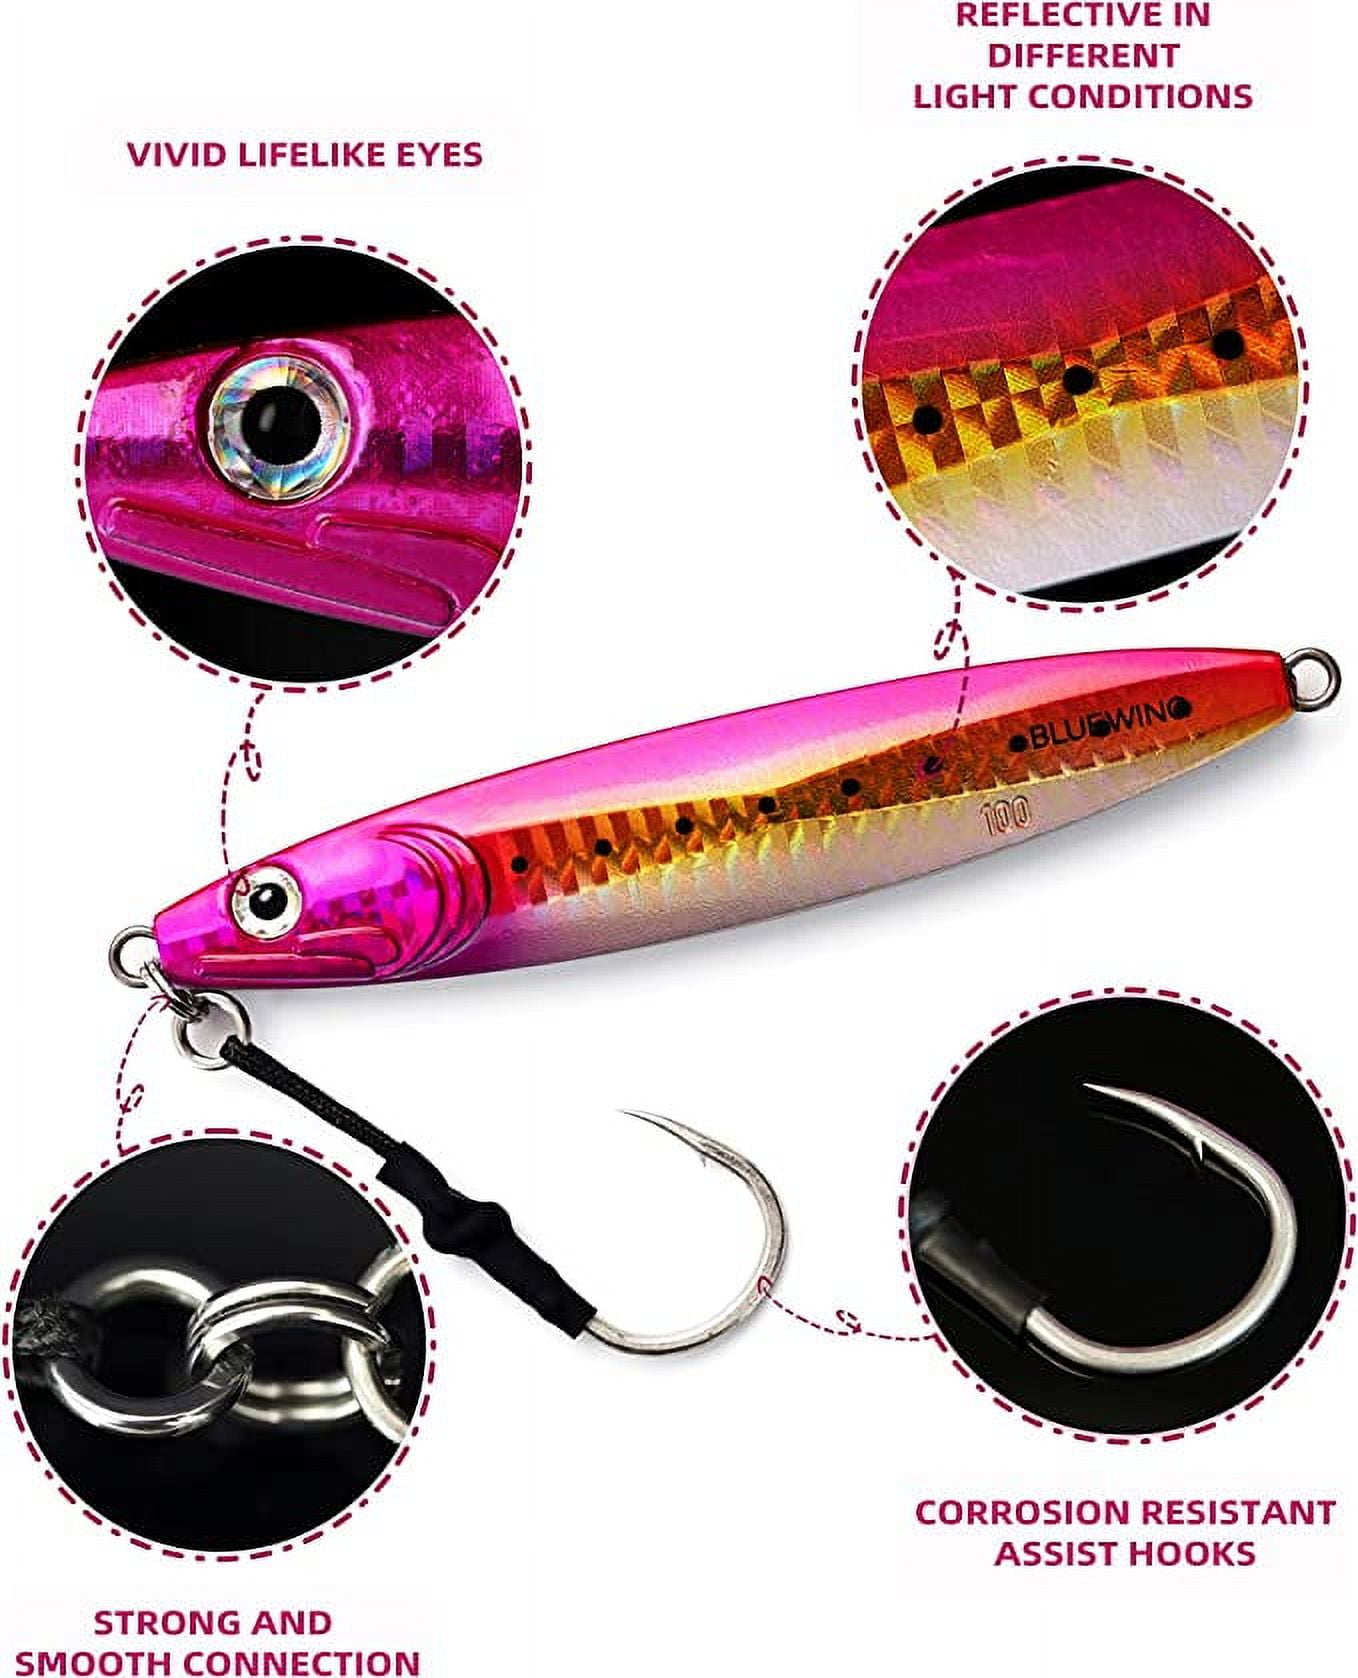 BLUEWING Fishing Lures Slow Pitch Jig Flat Fall Jigging Pitching Lures  Vertical Jigs, Baits with Assist Hook Fishing Artificial Bait, Pink/Gold,100g  